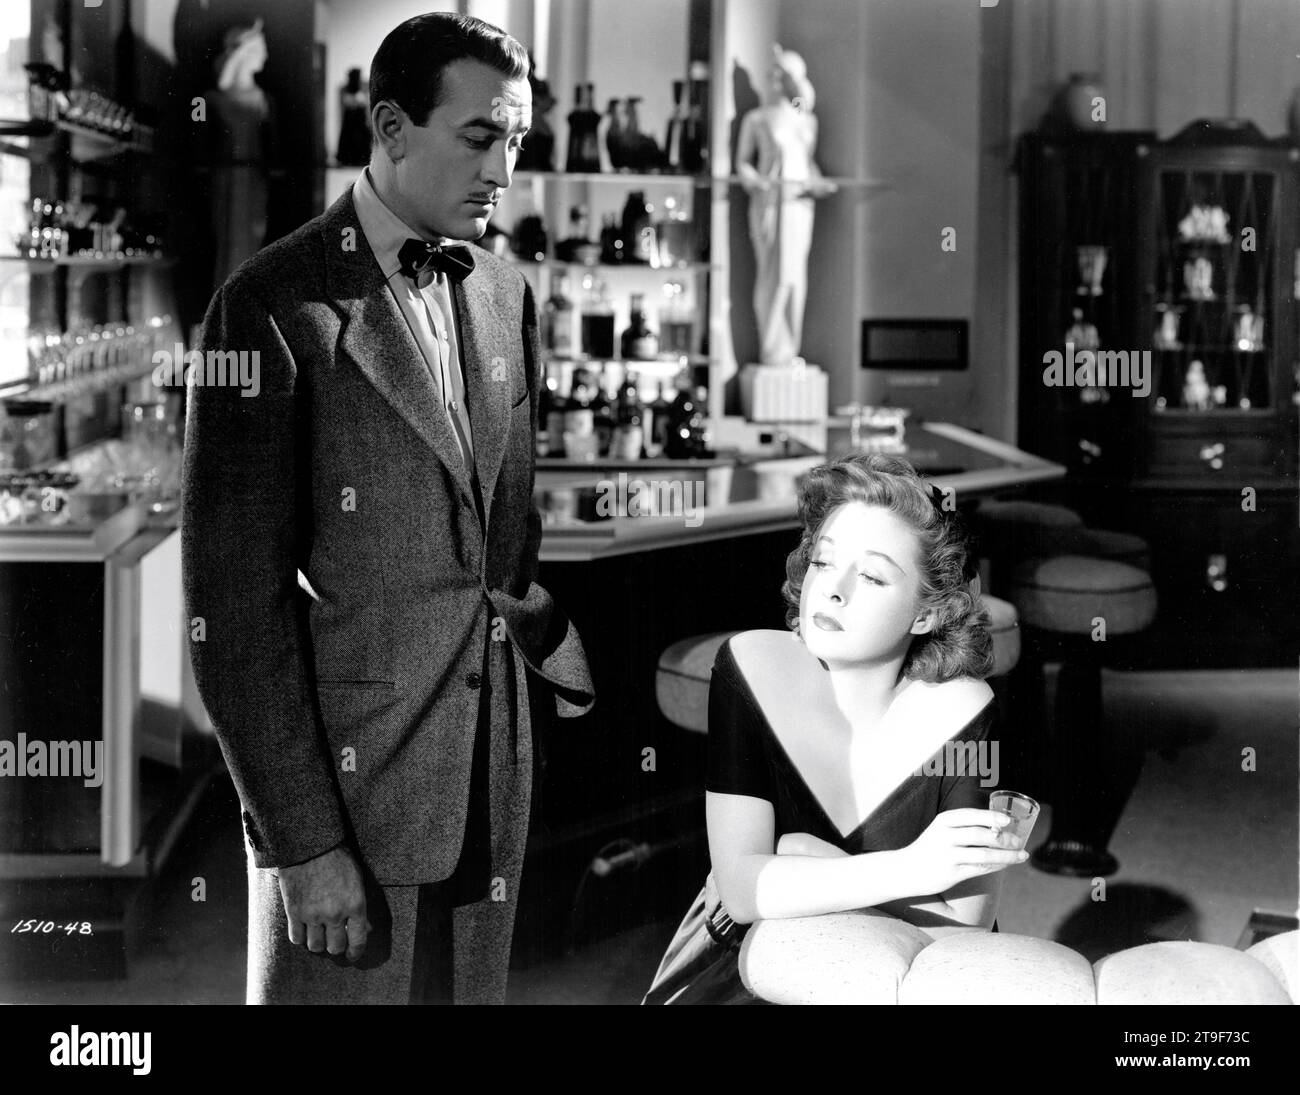 LEE BOWMAN and SUSAN HAYWARD in SMASH-UP : THE STORY OF A WOMAN 1947 director STUART HEISLER original story Dorothy Parker and Frank Cavett screenplay John Howard Lawson gowns Travis Banton Walter Wanger Productions / United Artists Stock Photo